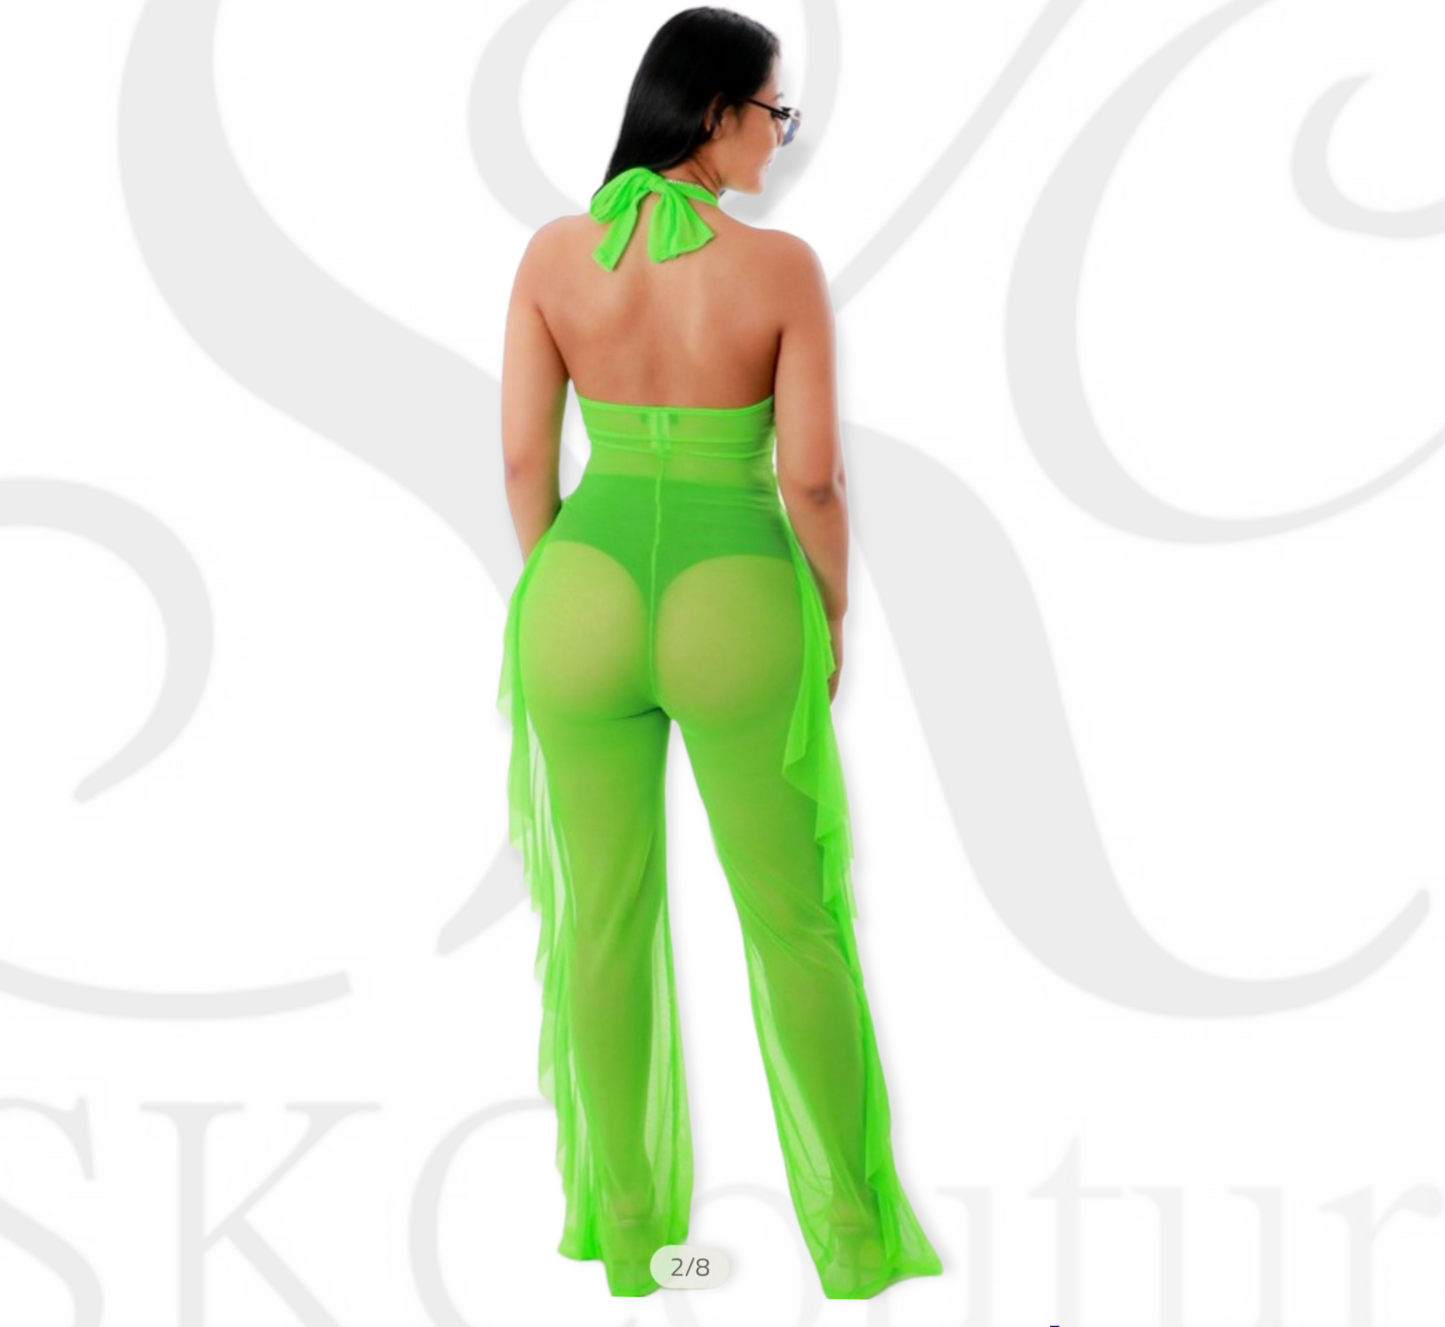 "Clearly She" Halter Top Sheer Jumpsuit